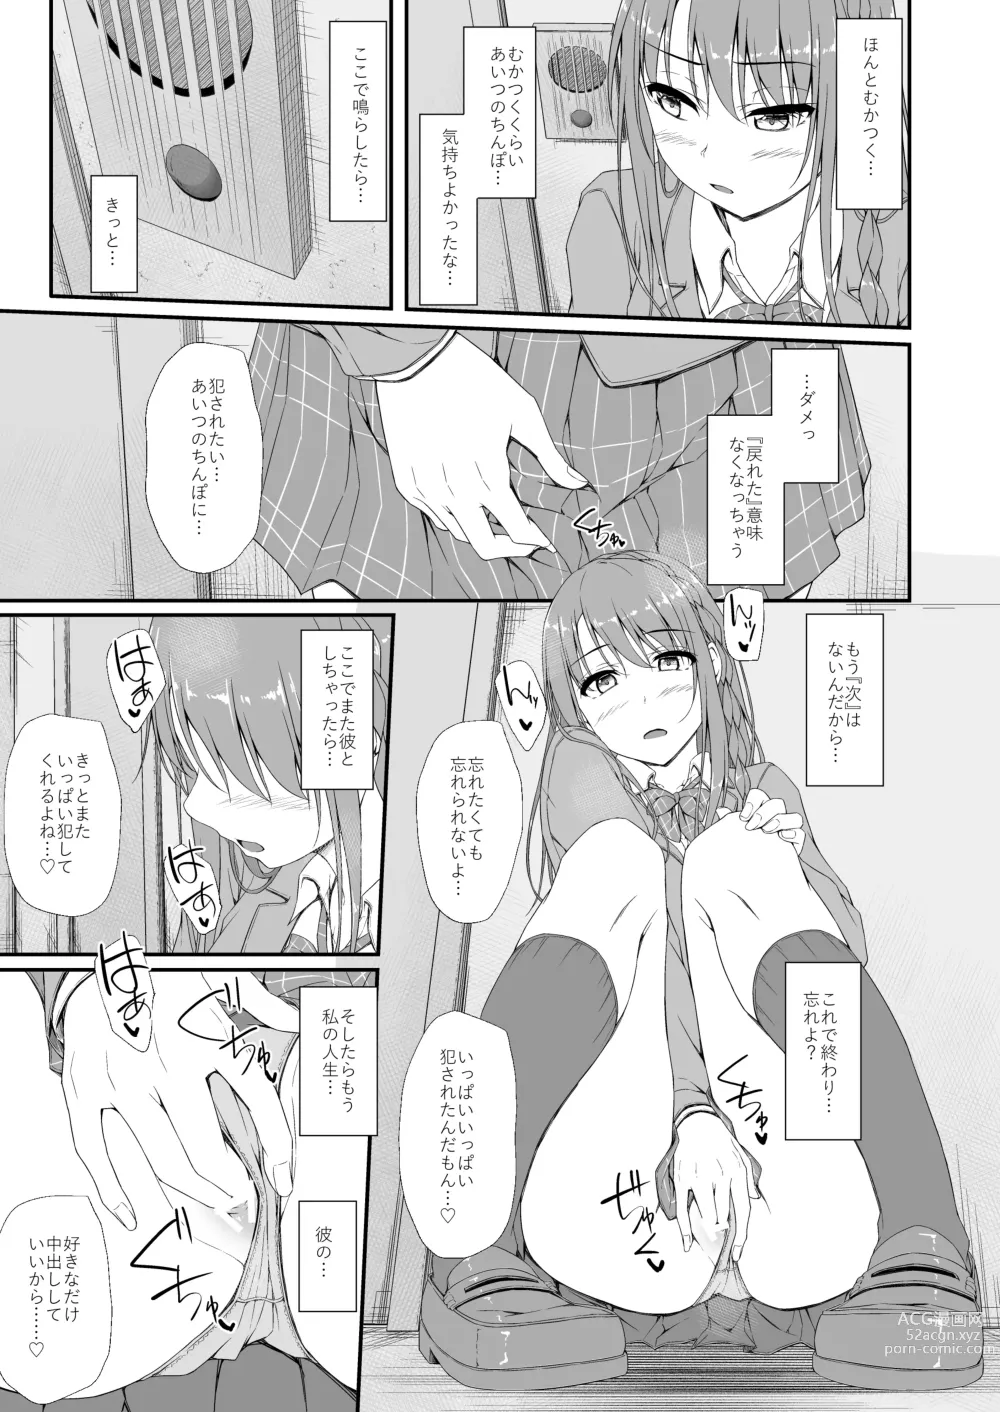 Page 28 of doujinshi Re:Temptation 6